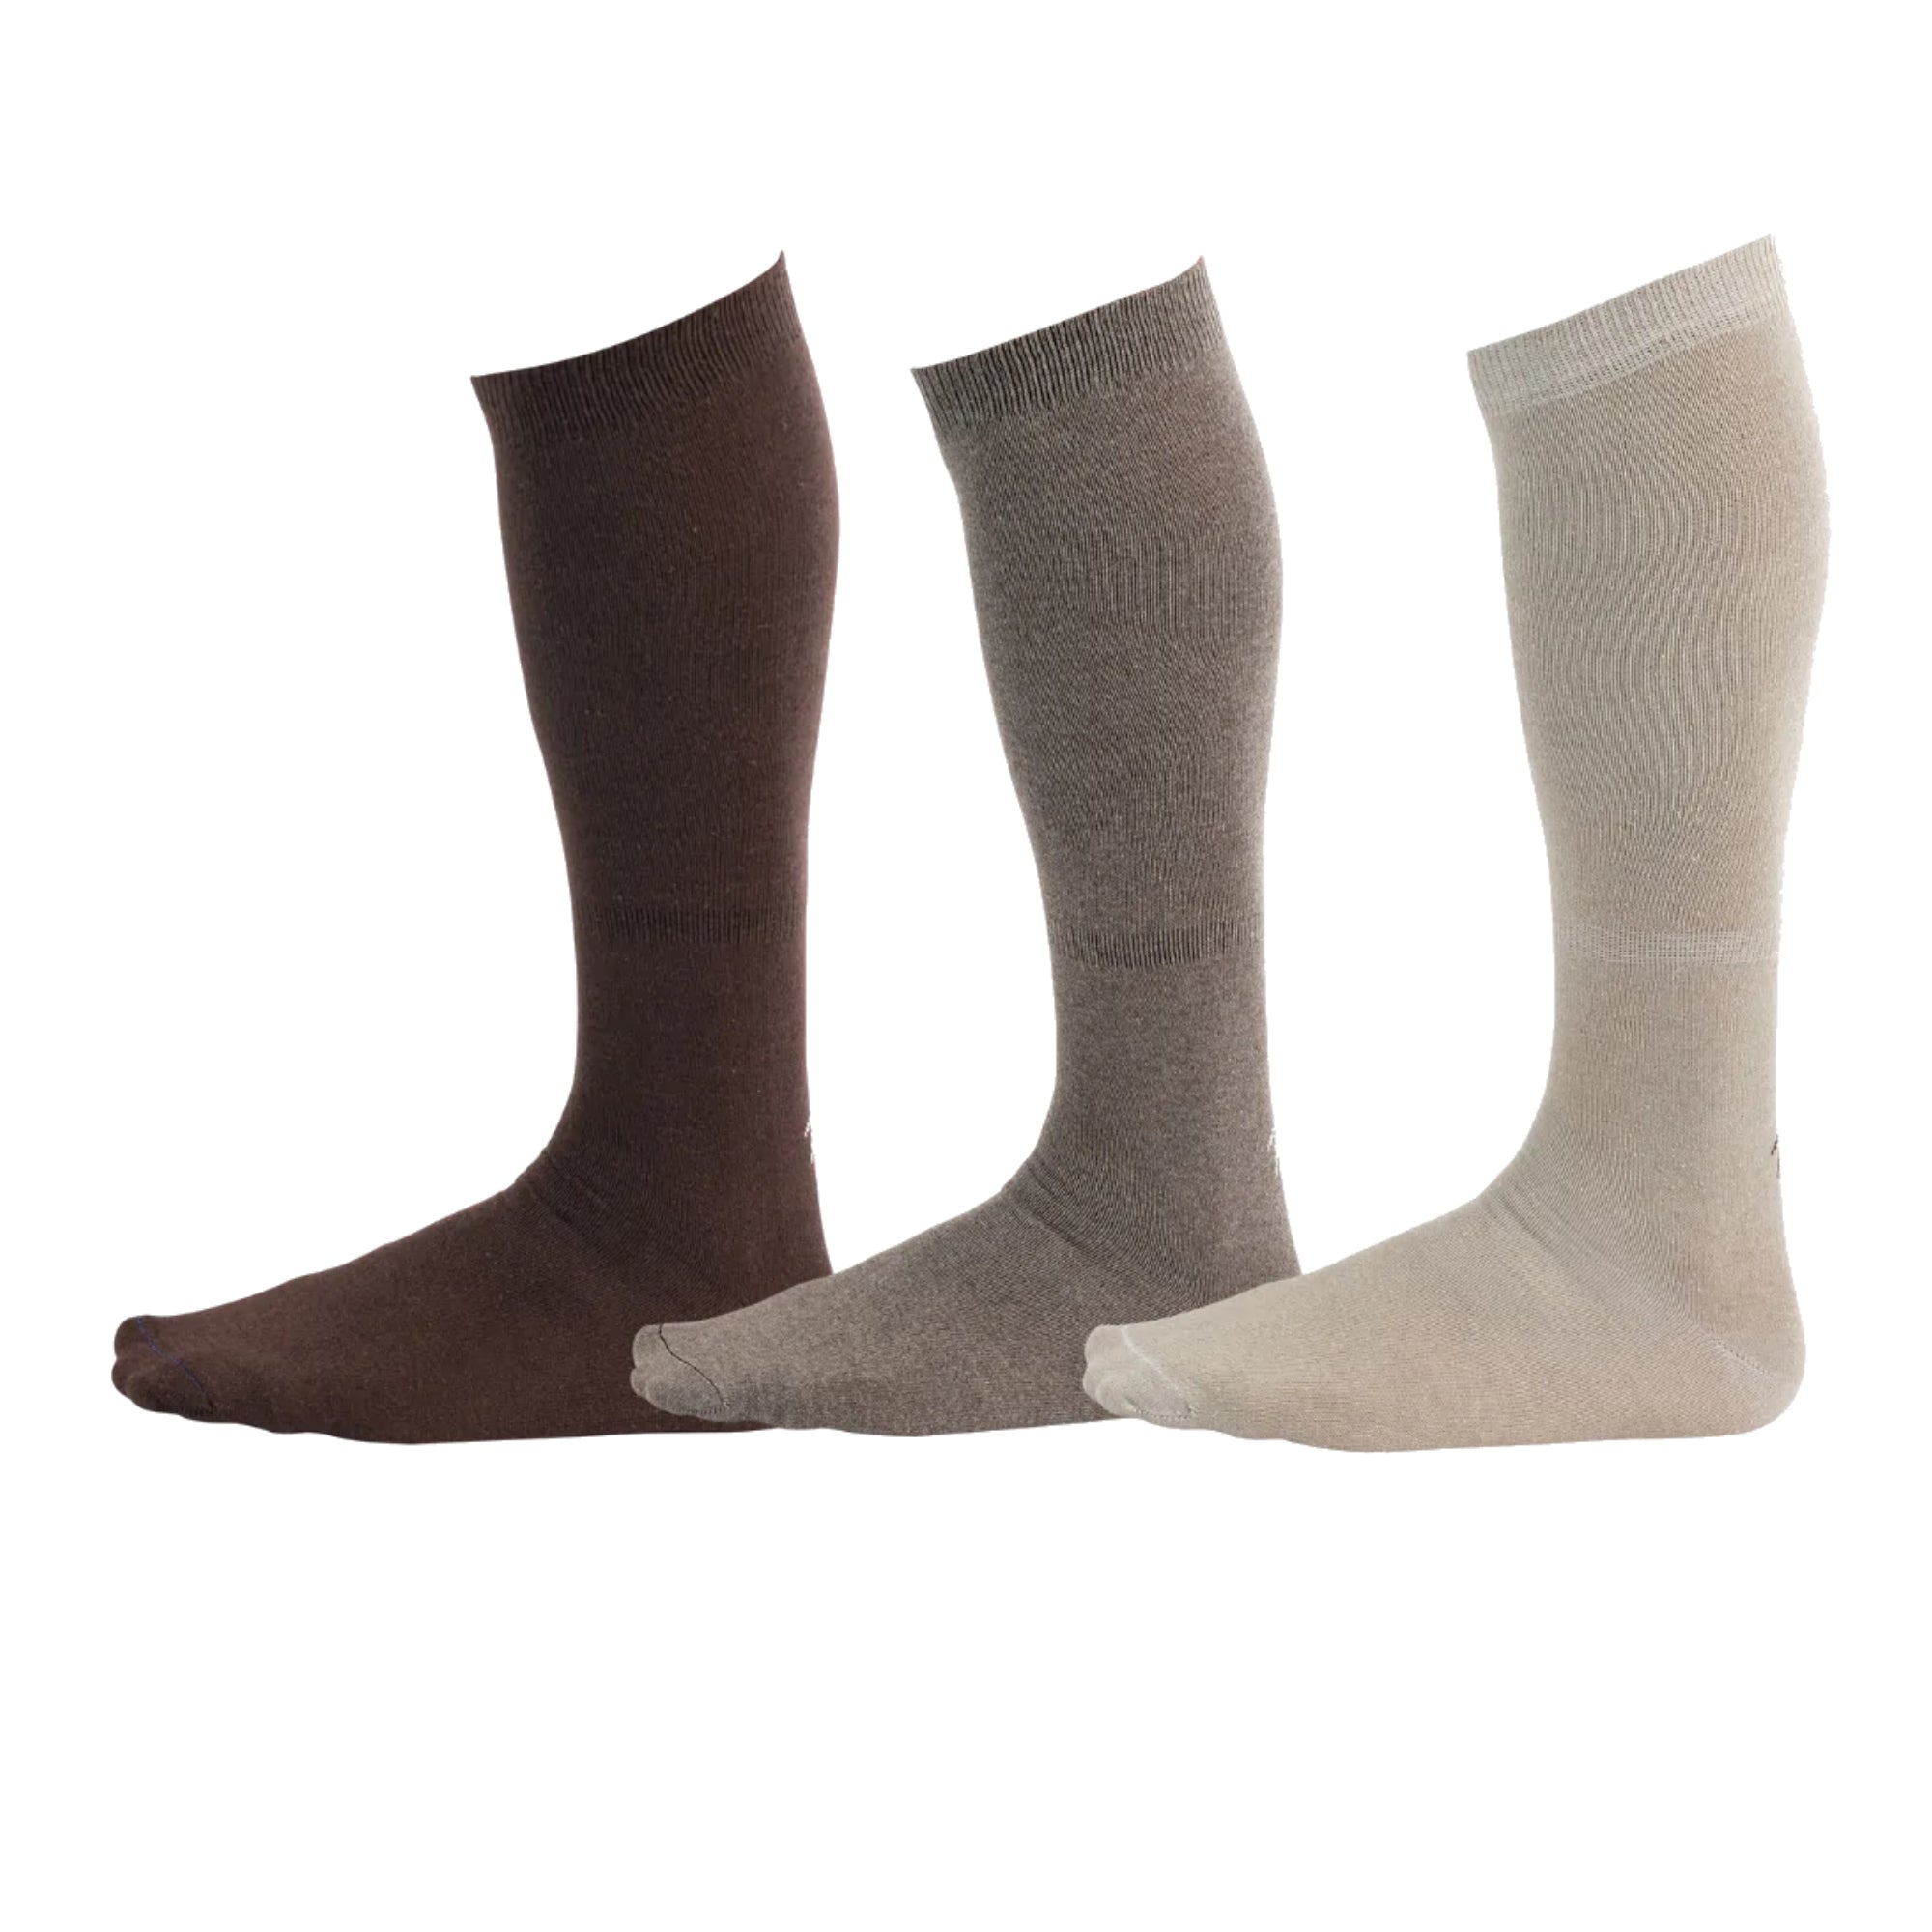 solid brown over the calf dress socks, solid light brown over the calf dress socks, solid beige over the calf dress socks